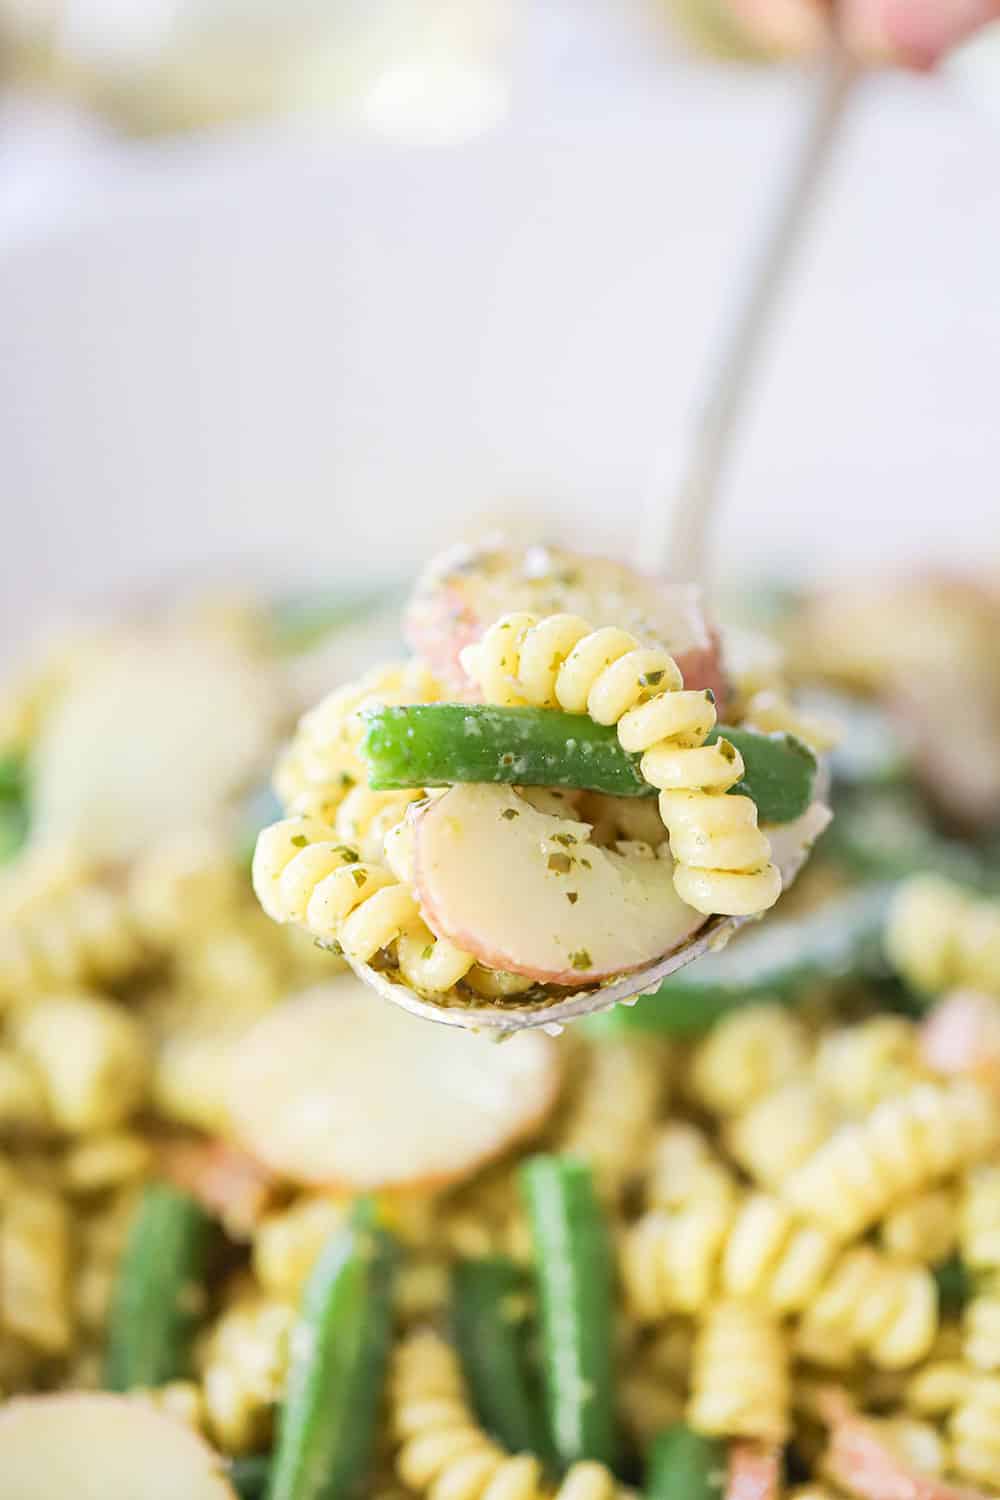 A hand holding up a large spoon filled with pesto pasta salad with potatoes and green beans.